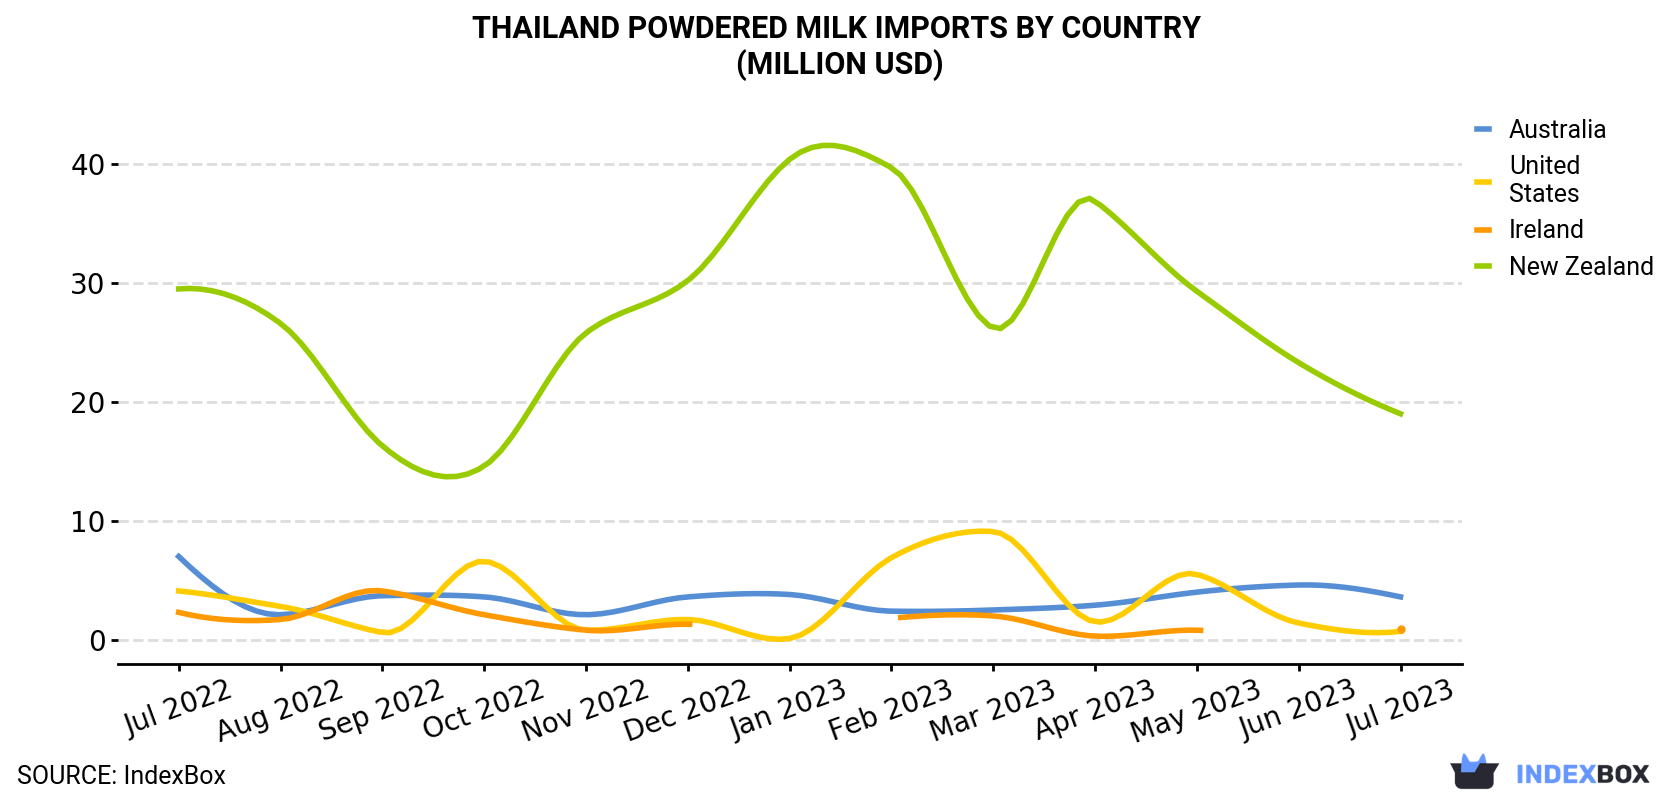 Thailand Powdered Milk Imports By Country (Million USD)